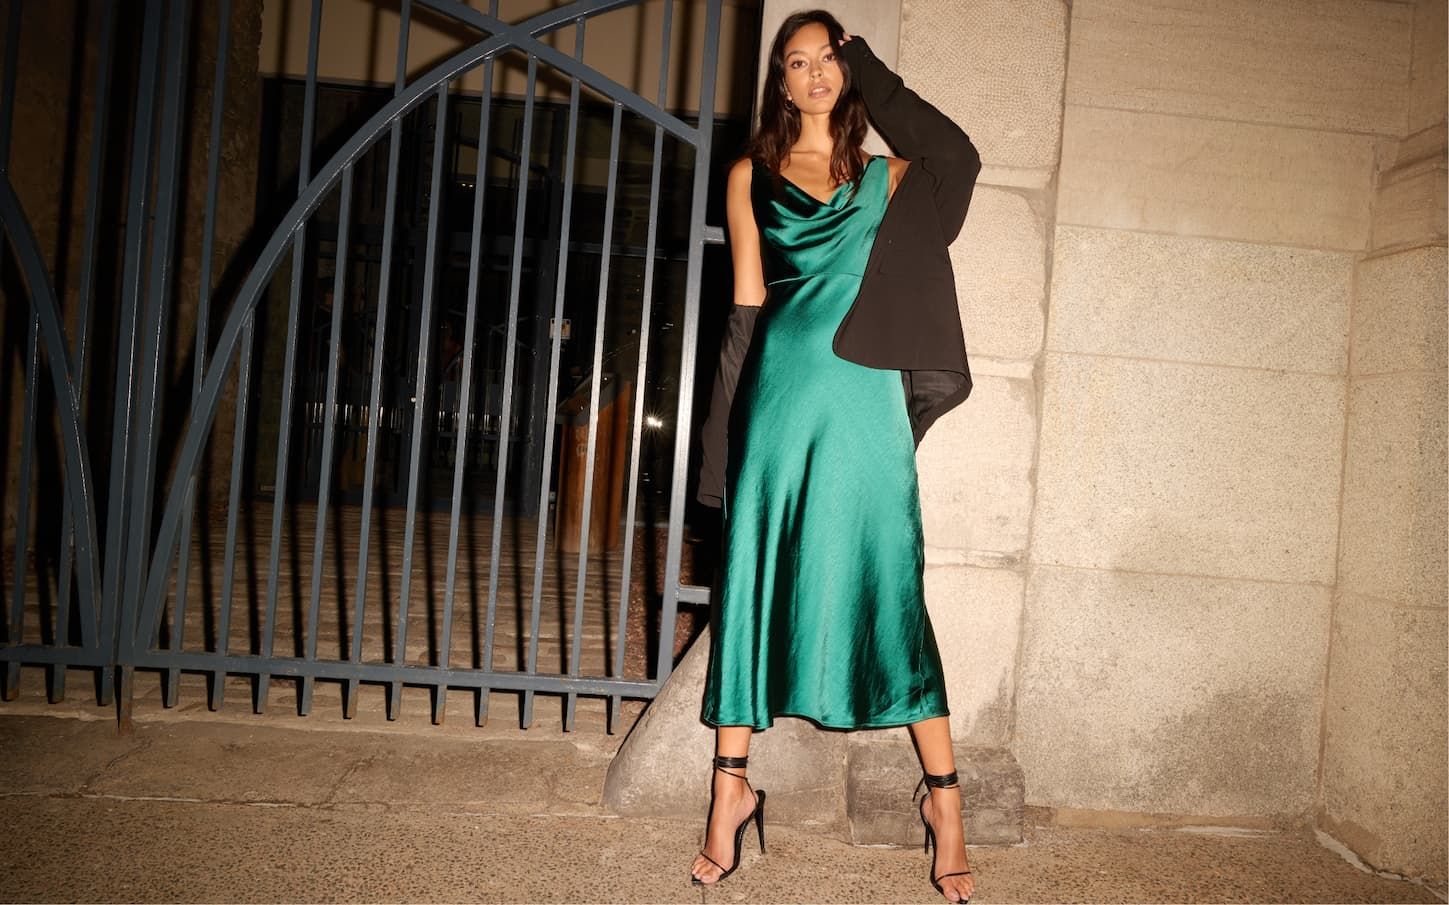 A model wears a long green satin cowl neck dress with a black blazer over.